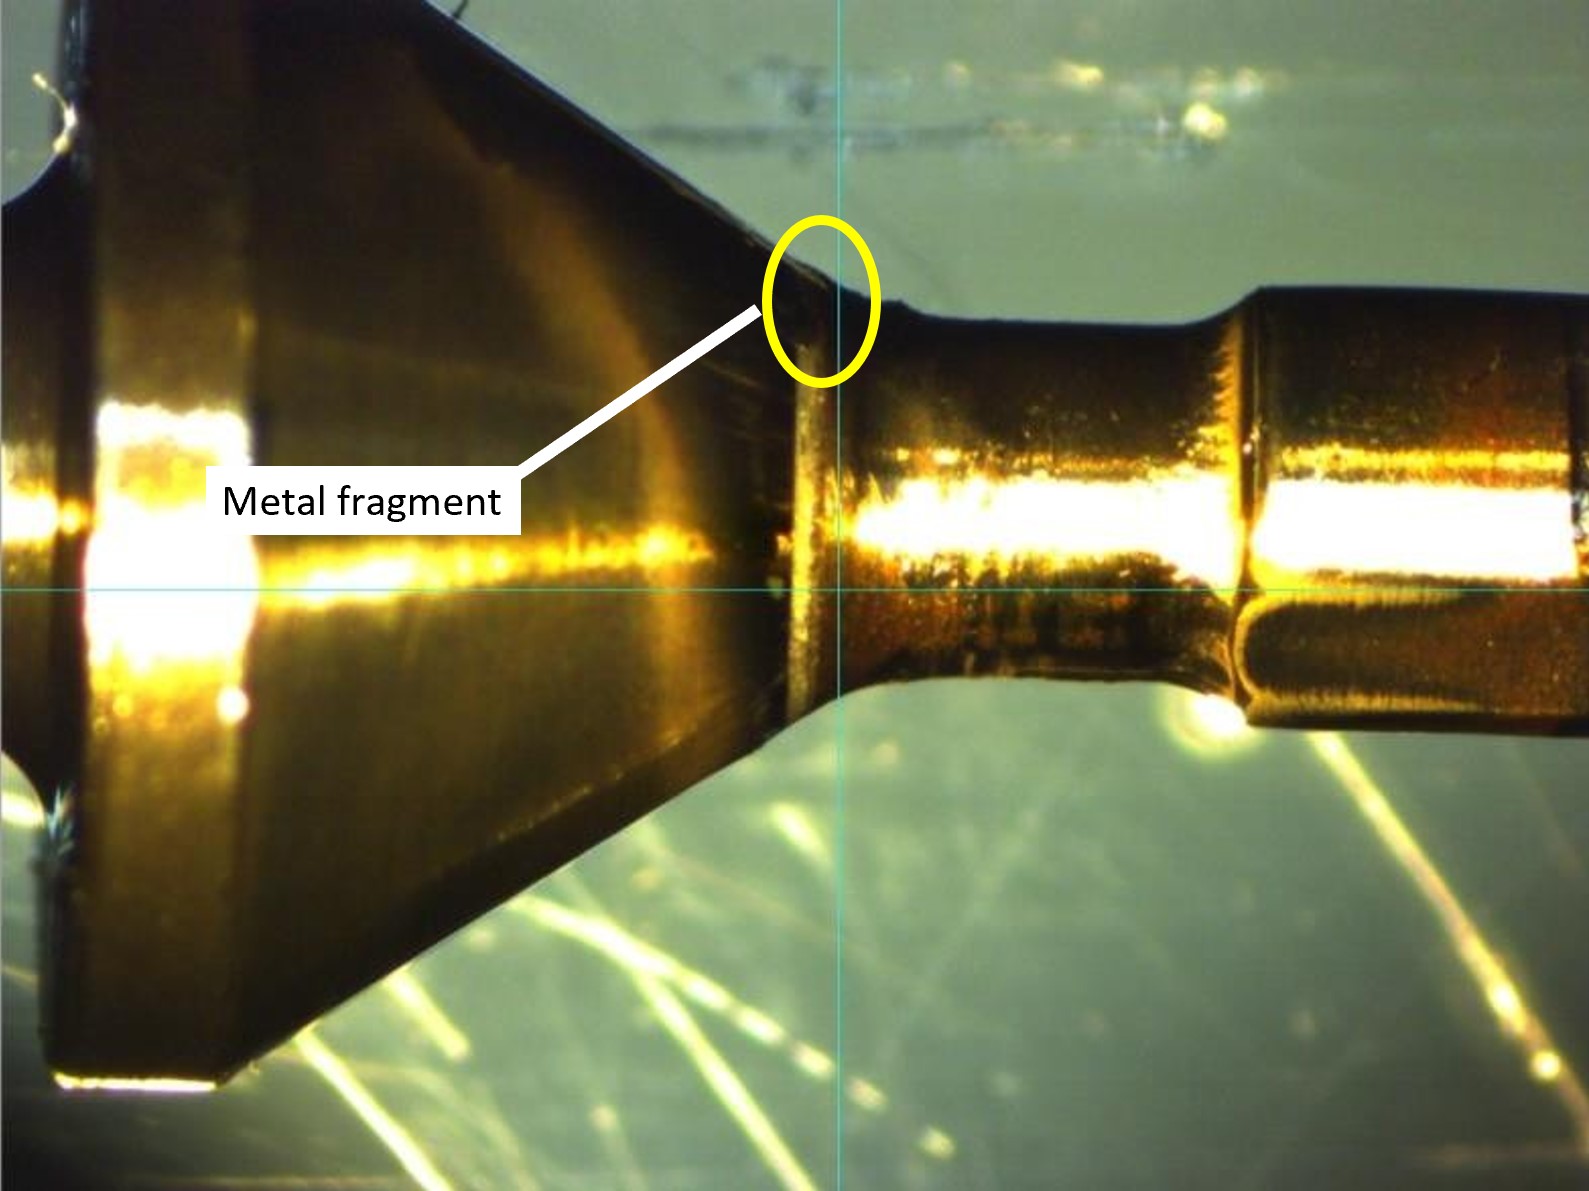 Location of the metal fragment on the sealing surface on the high-pressure valve (Source: AeroControlex Group, Inc, with TSB annotations)